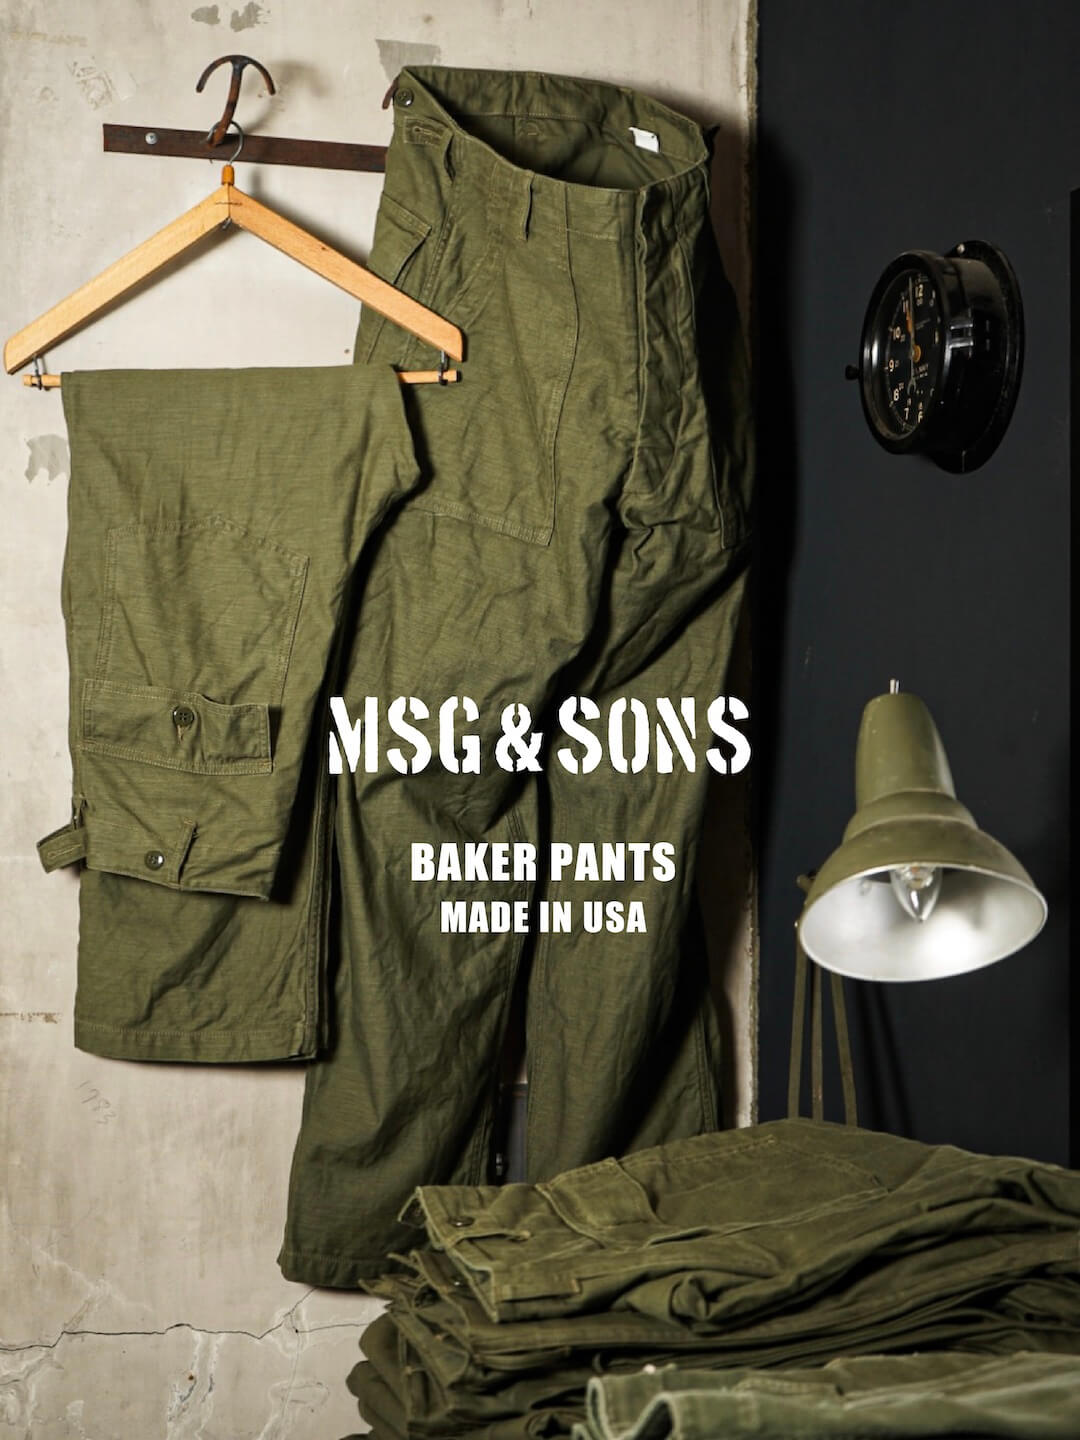 MSG & SONS BAKER PANTS – MADE IN USA